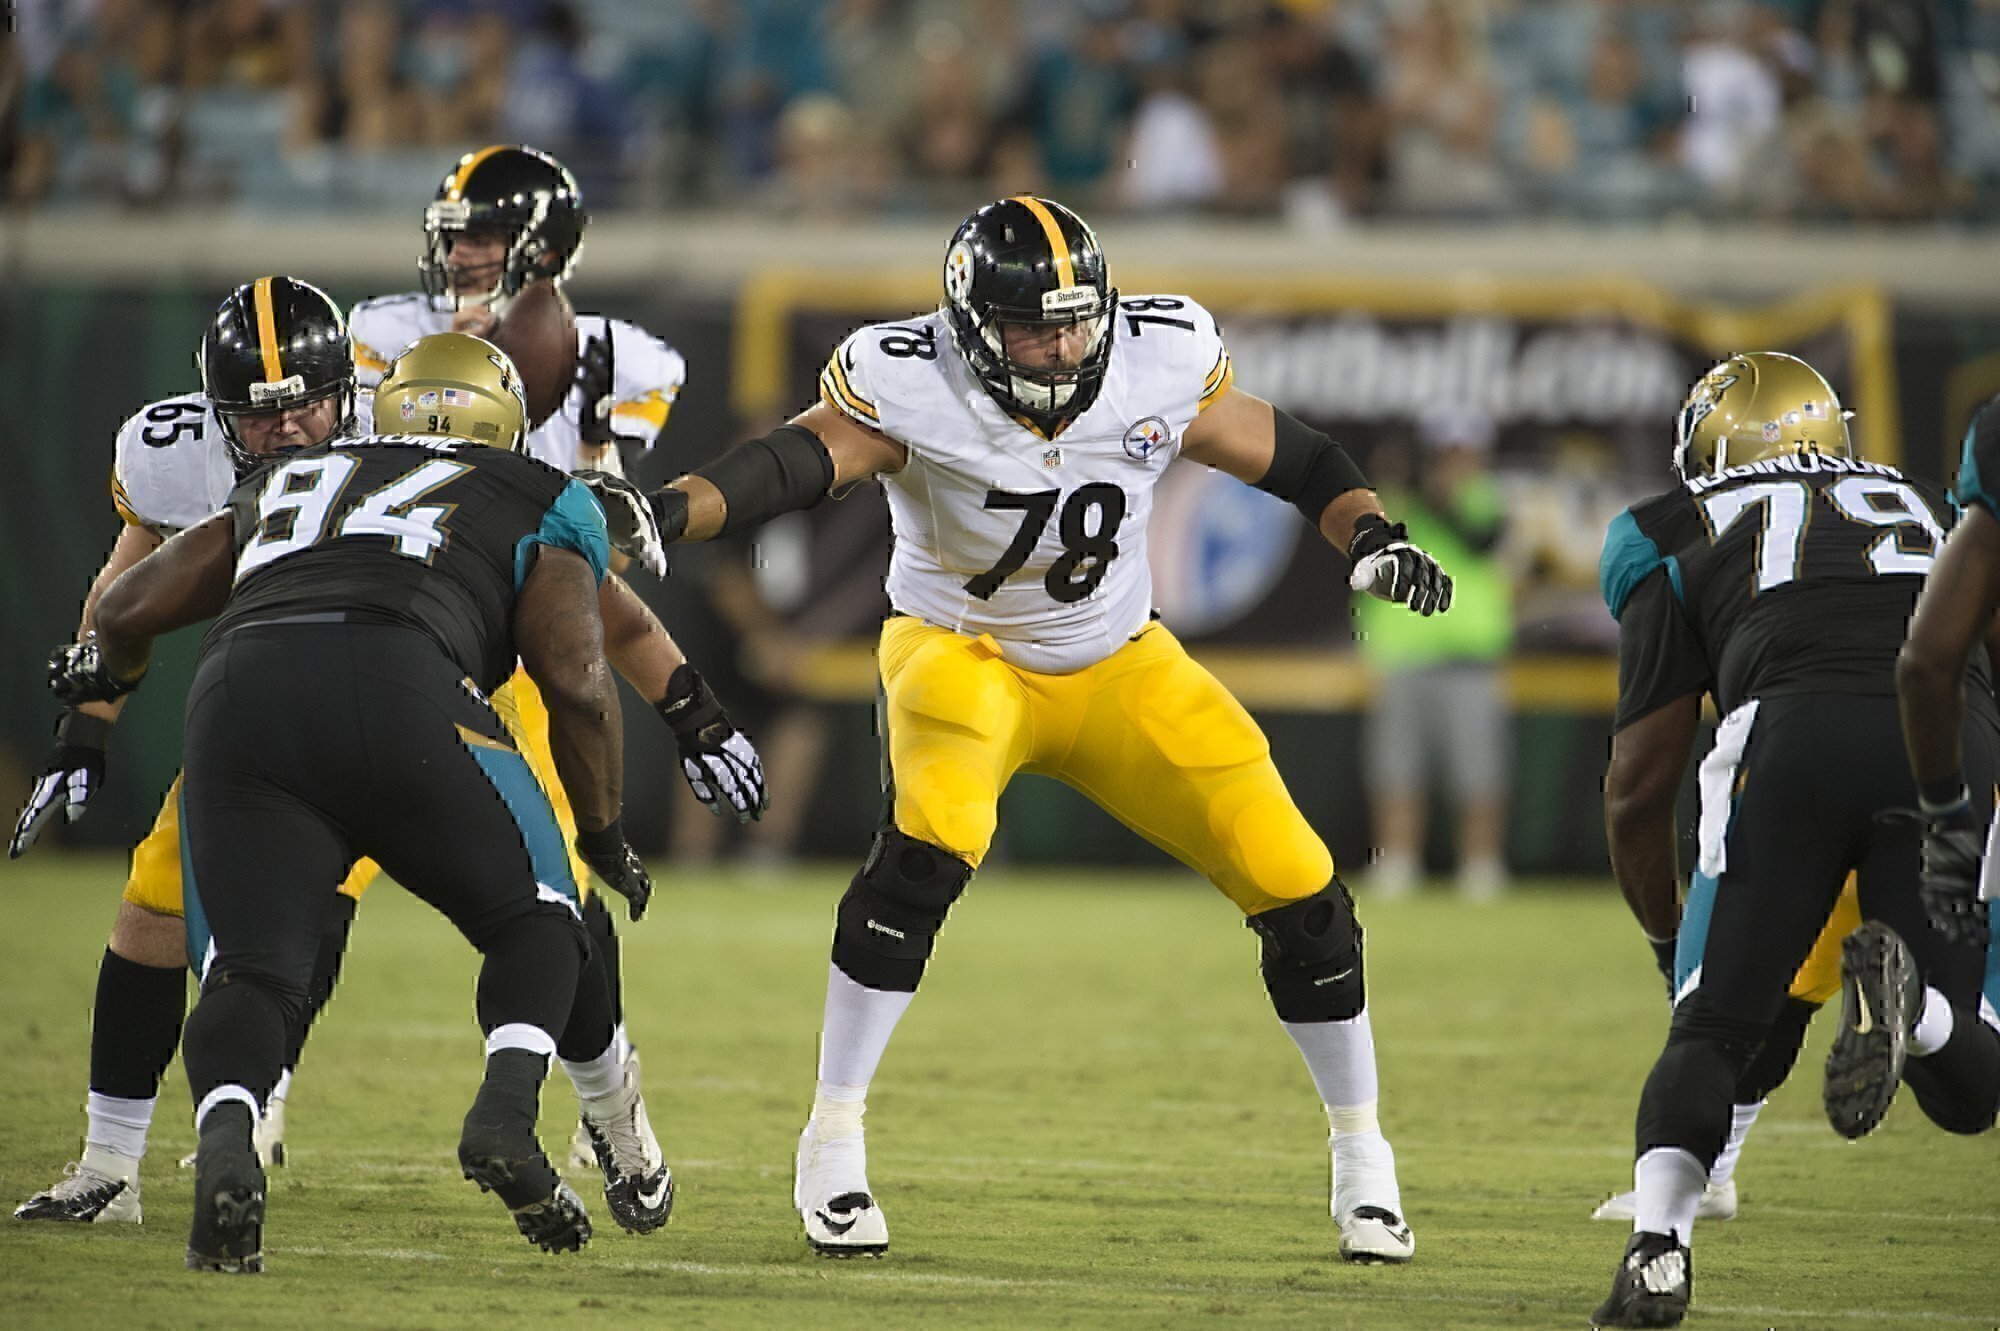 Alejandro Villanueva, an army veteran who played for the Pittsburgh Steelers